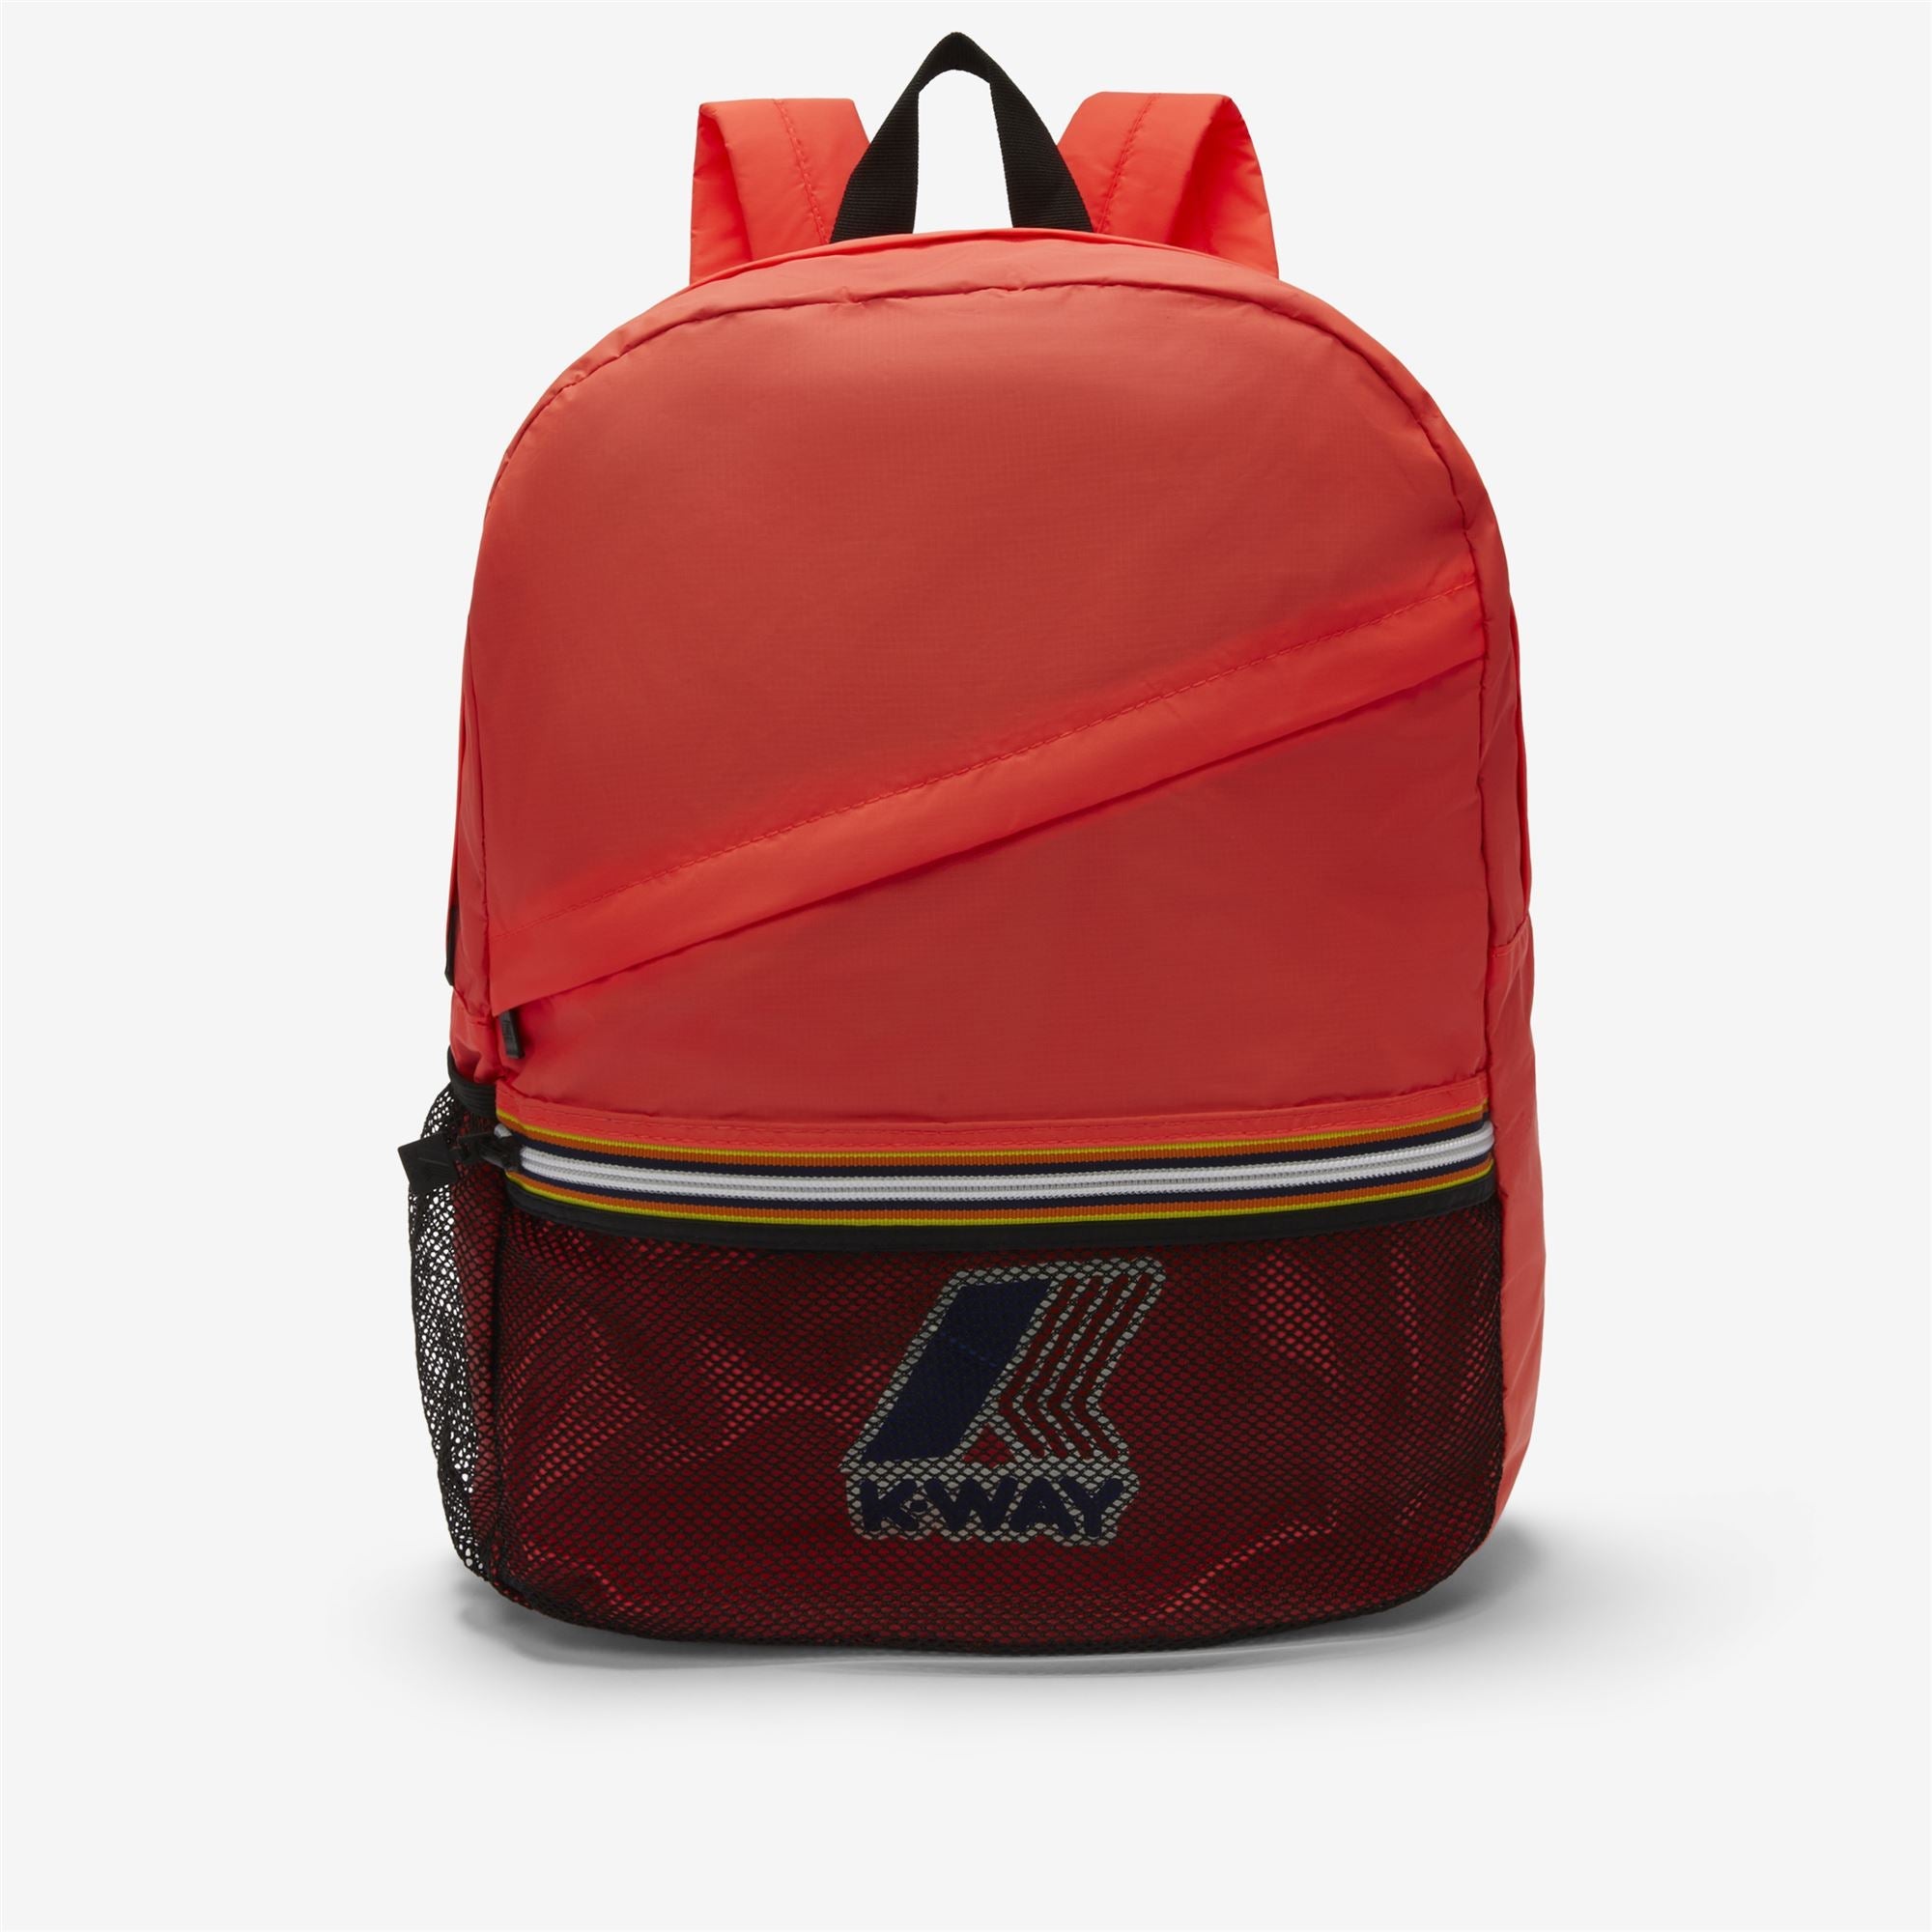 Francois - Packable Ripstop Backpack in Red Papavero